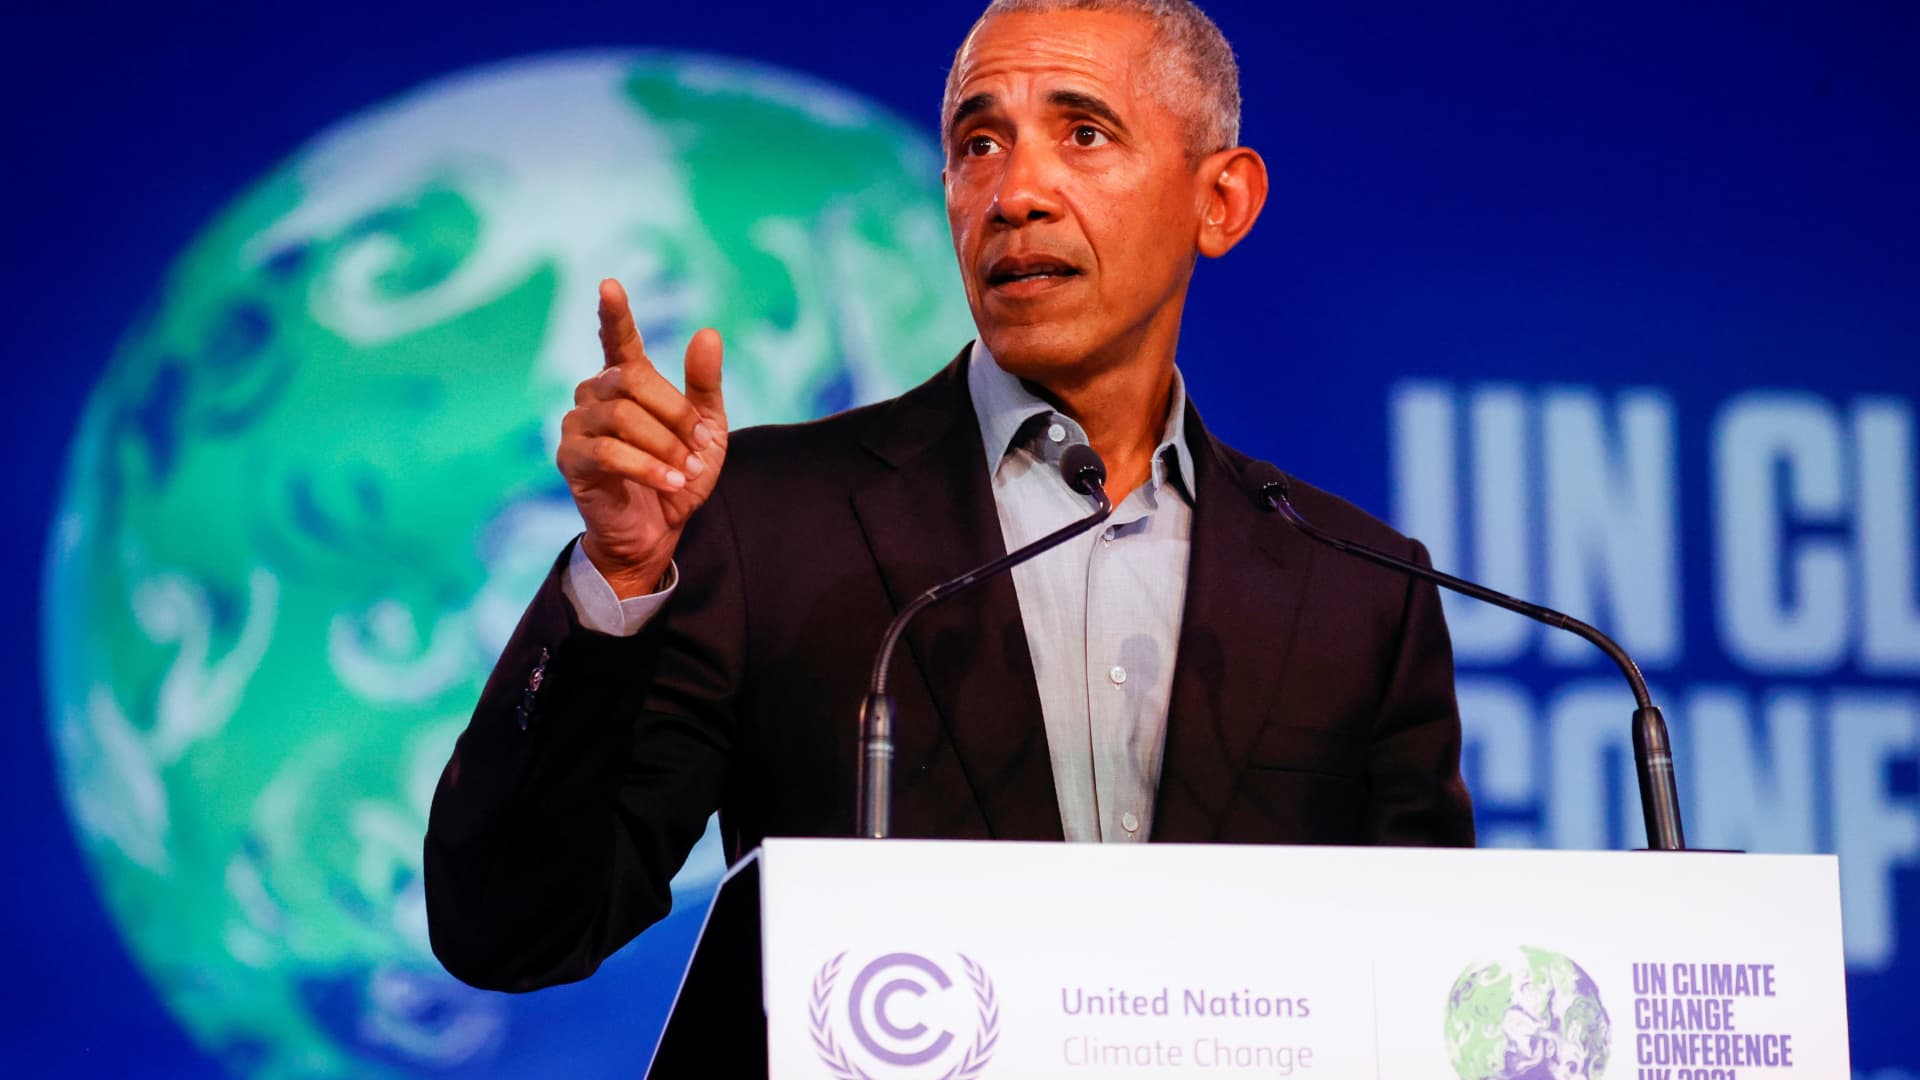 U.S. former President Barack Obama delivers a speech during the UN Climate Change Conference (COP26), in Glasgow, Scotland, Britain, November 8, 2021.